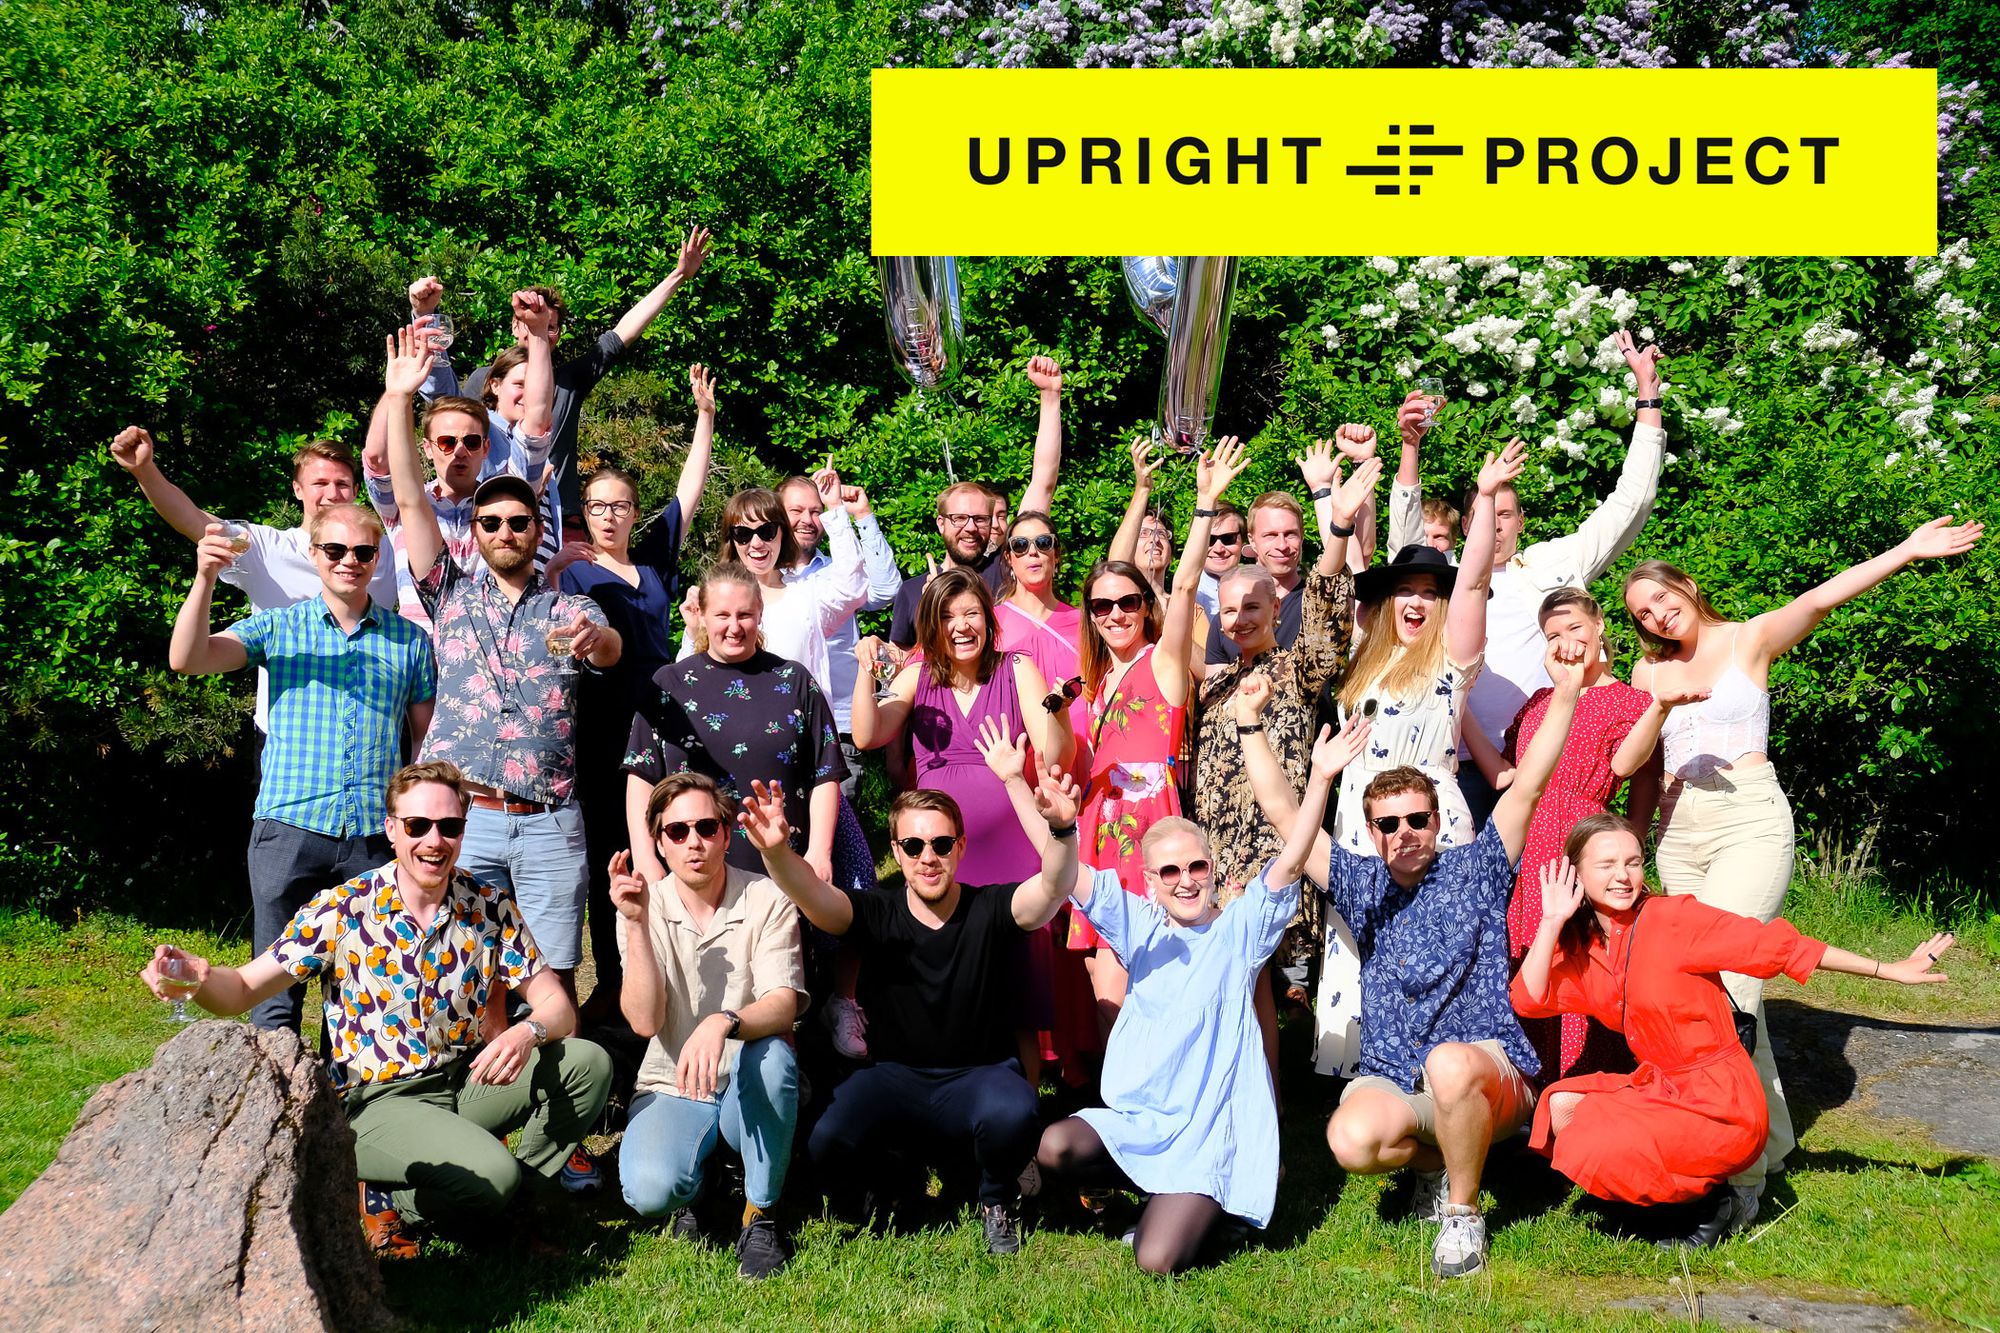 The group photo of the Upright Project team with the company logo